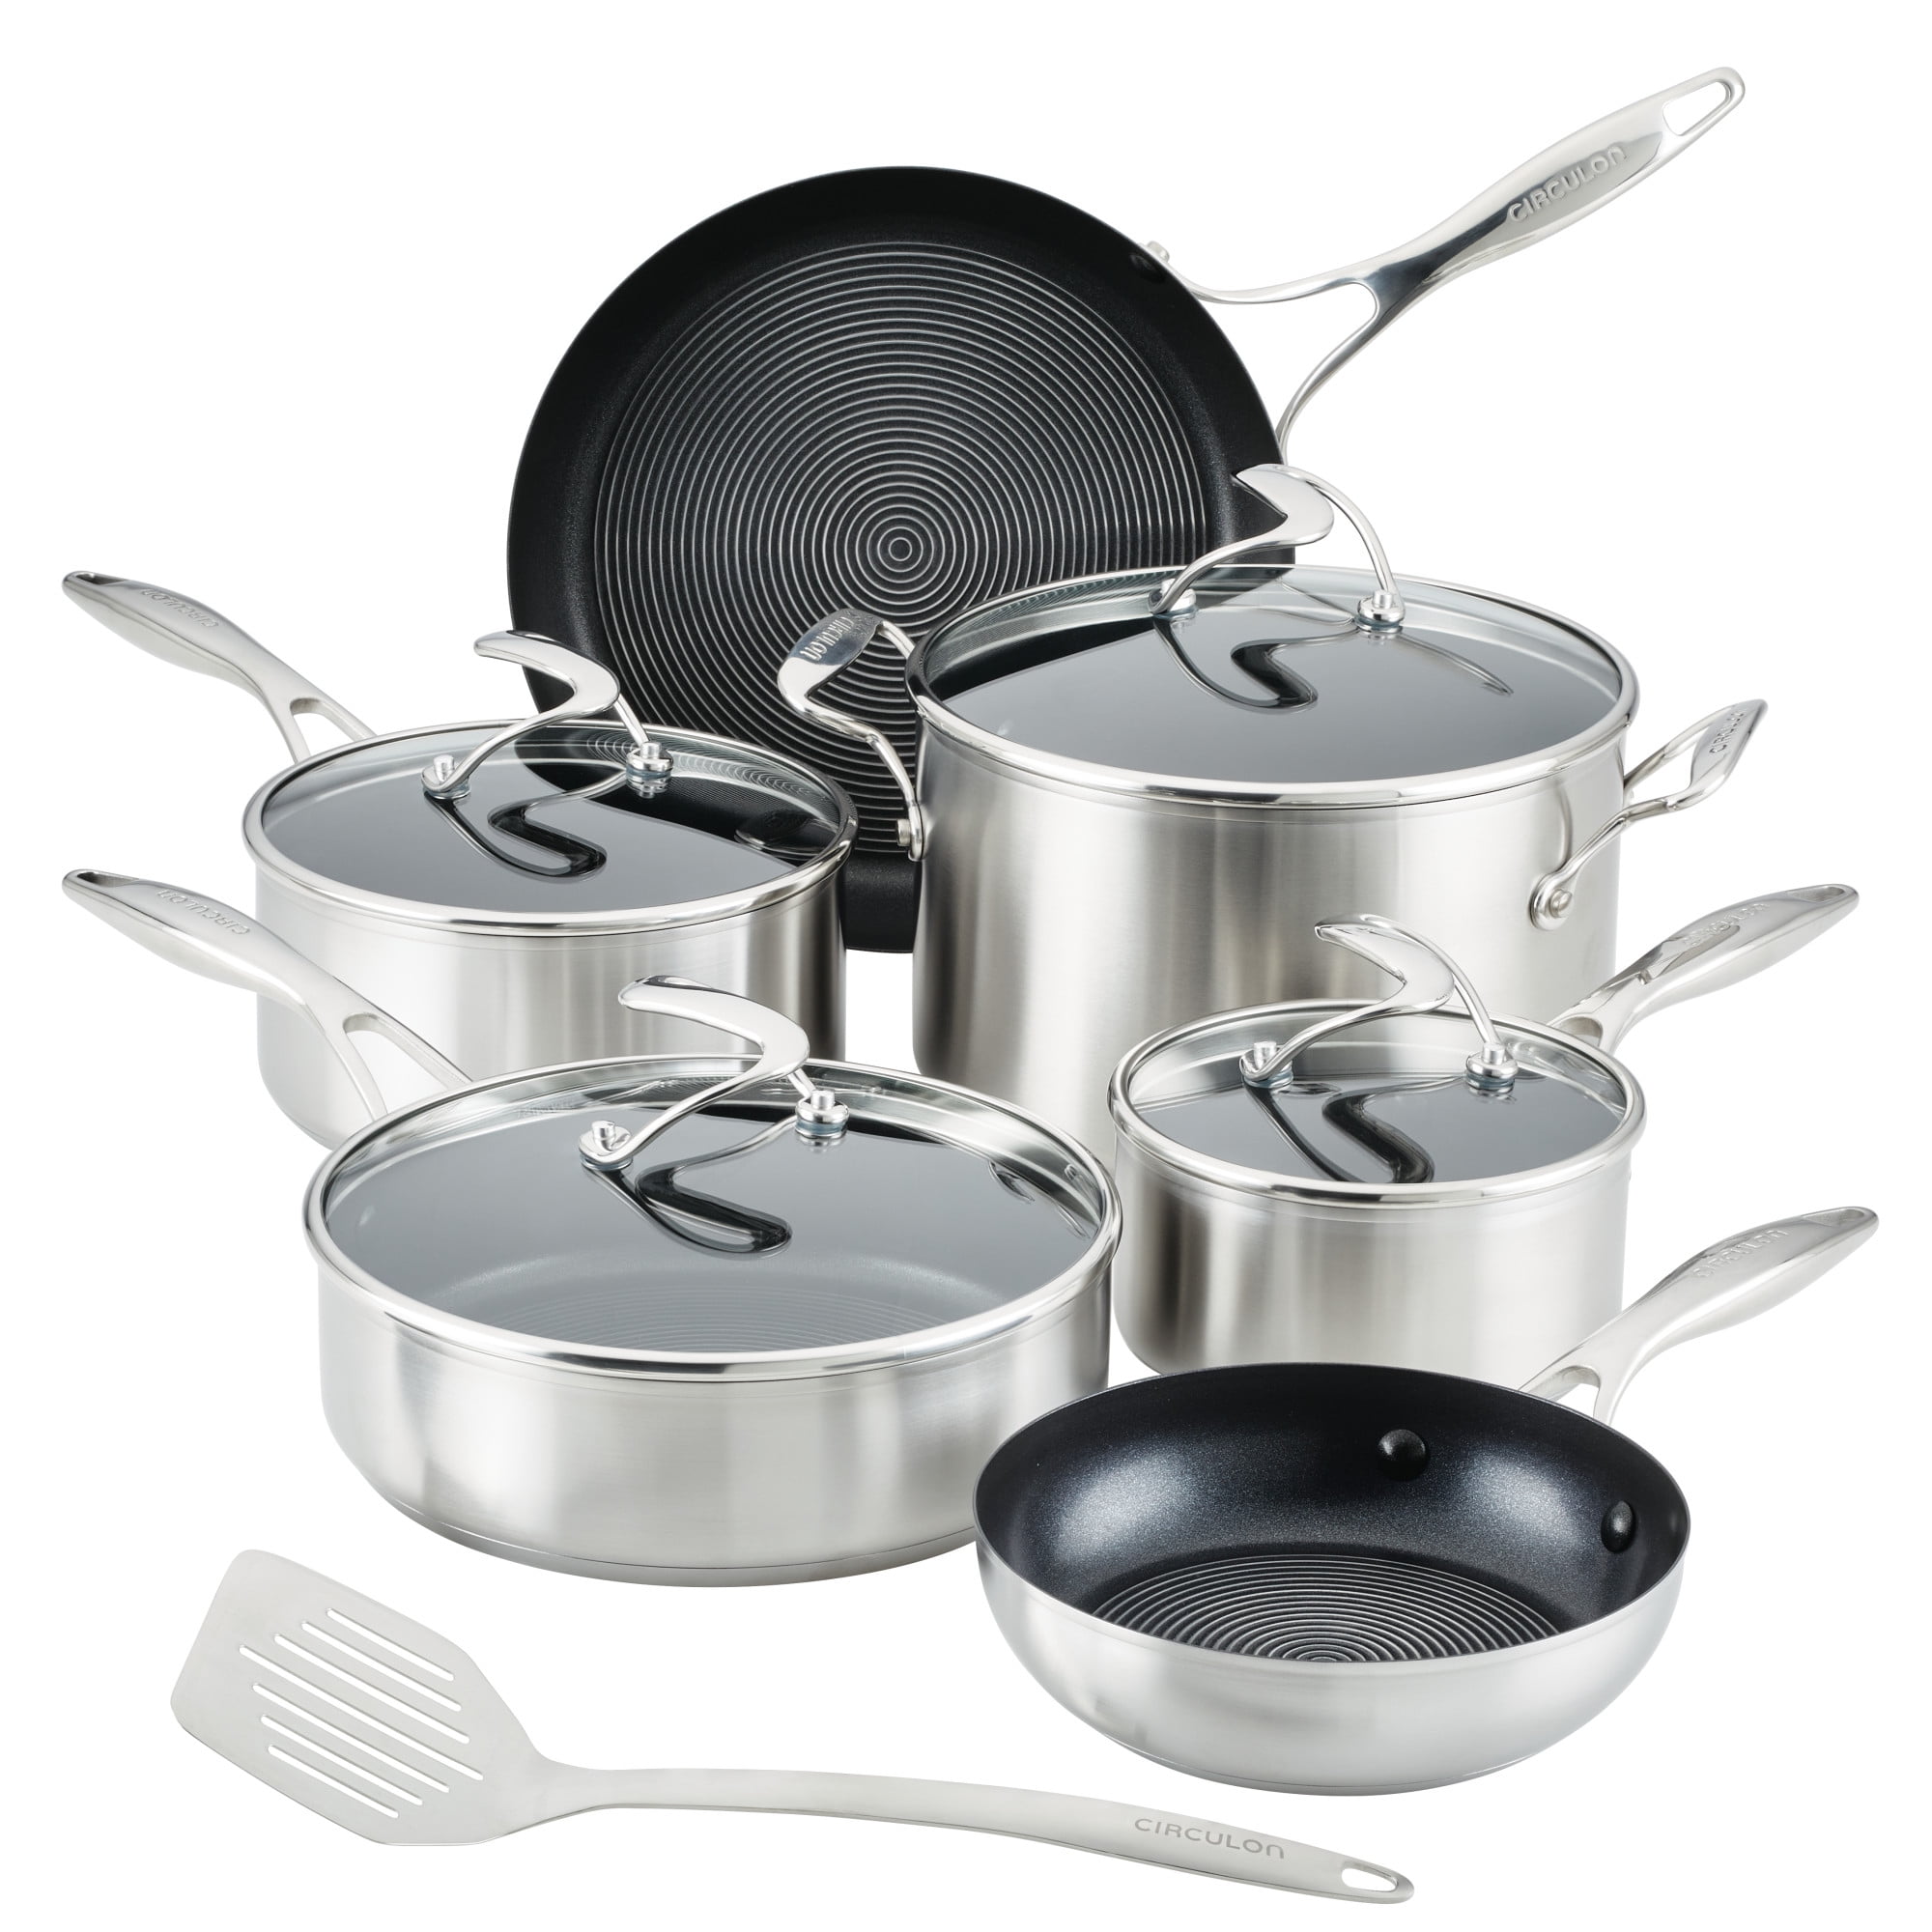 HexClad 7 Piece Hybrid Stainless Steel Cookware Set - 6 Piece Frying Pan  Set and 12 Inch Griddle Skillet, Metal Utensil and Dishwasher Safe,  Induction